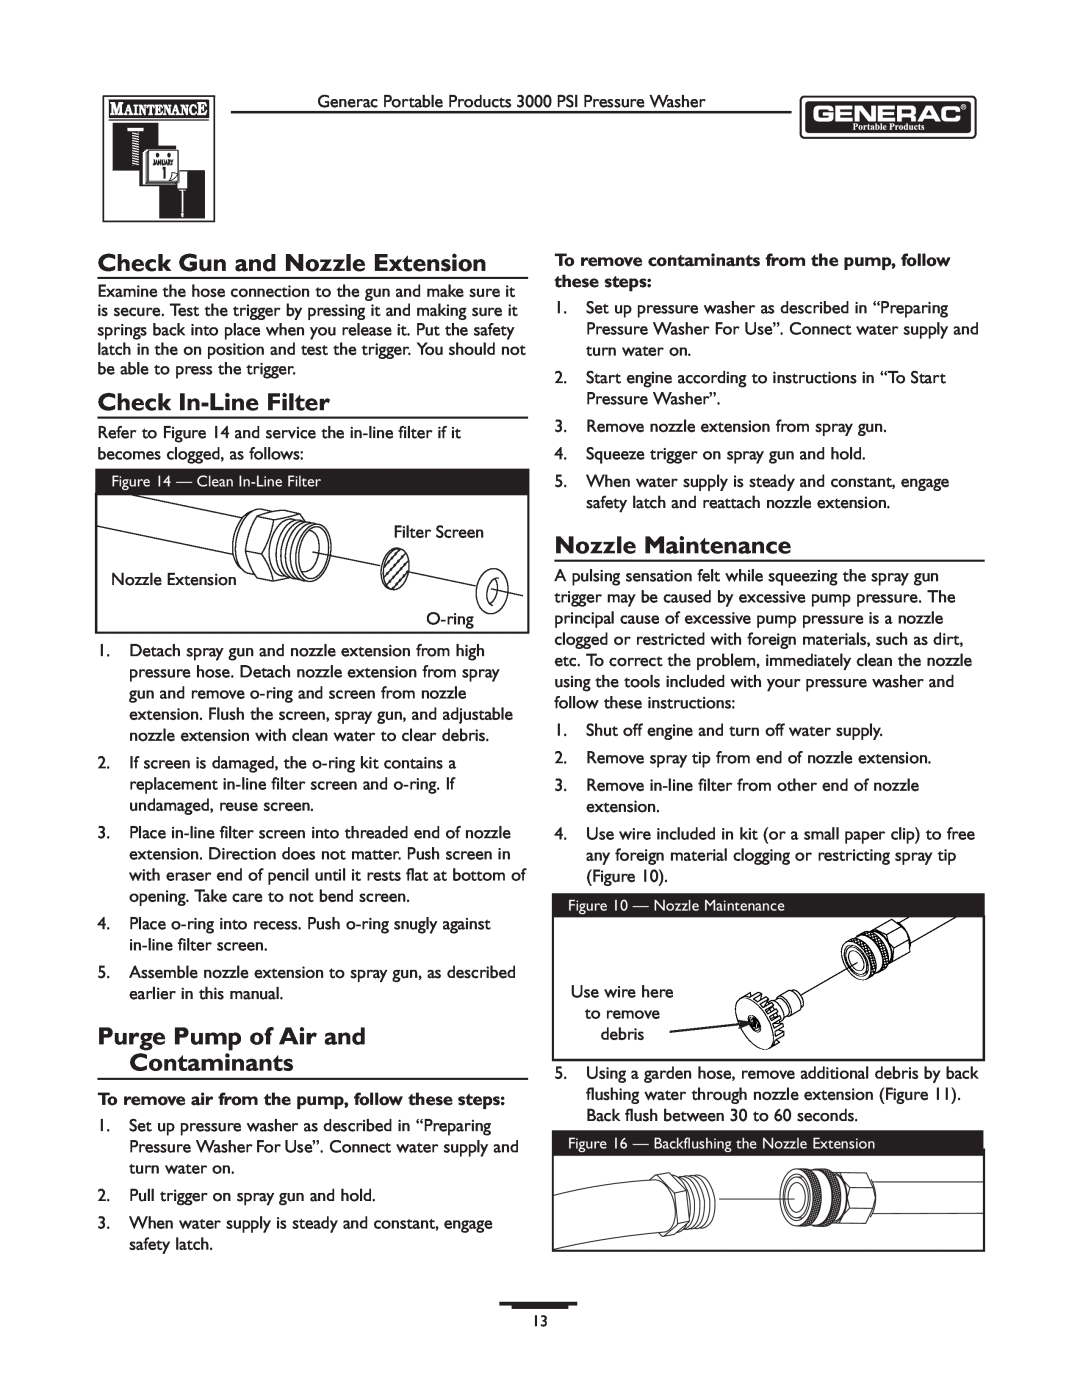 Briggs & Stratton 1418-2 owner manual Check Gun and Nozzle Extension, Check In-Line Filter, Nozzle Maintenance 